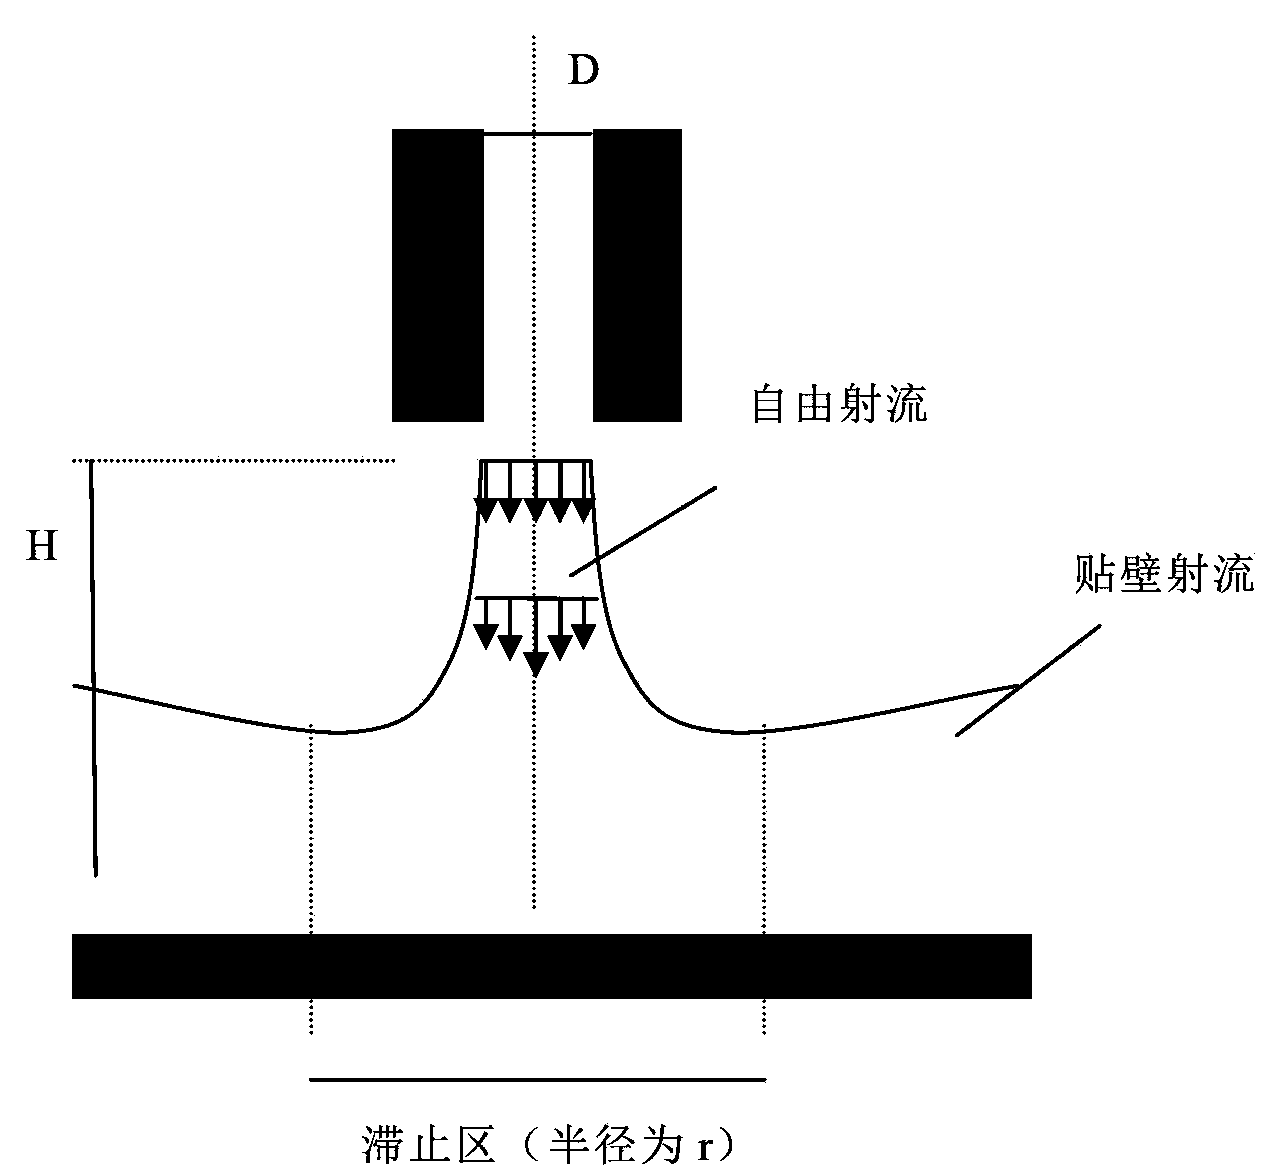 Multi-inlet single-cavity type hot diaphragm cooling device for ground-based solar telescope